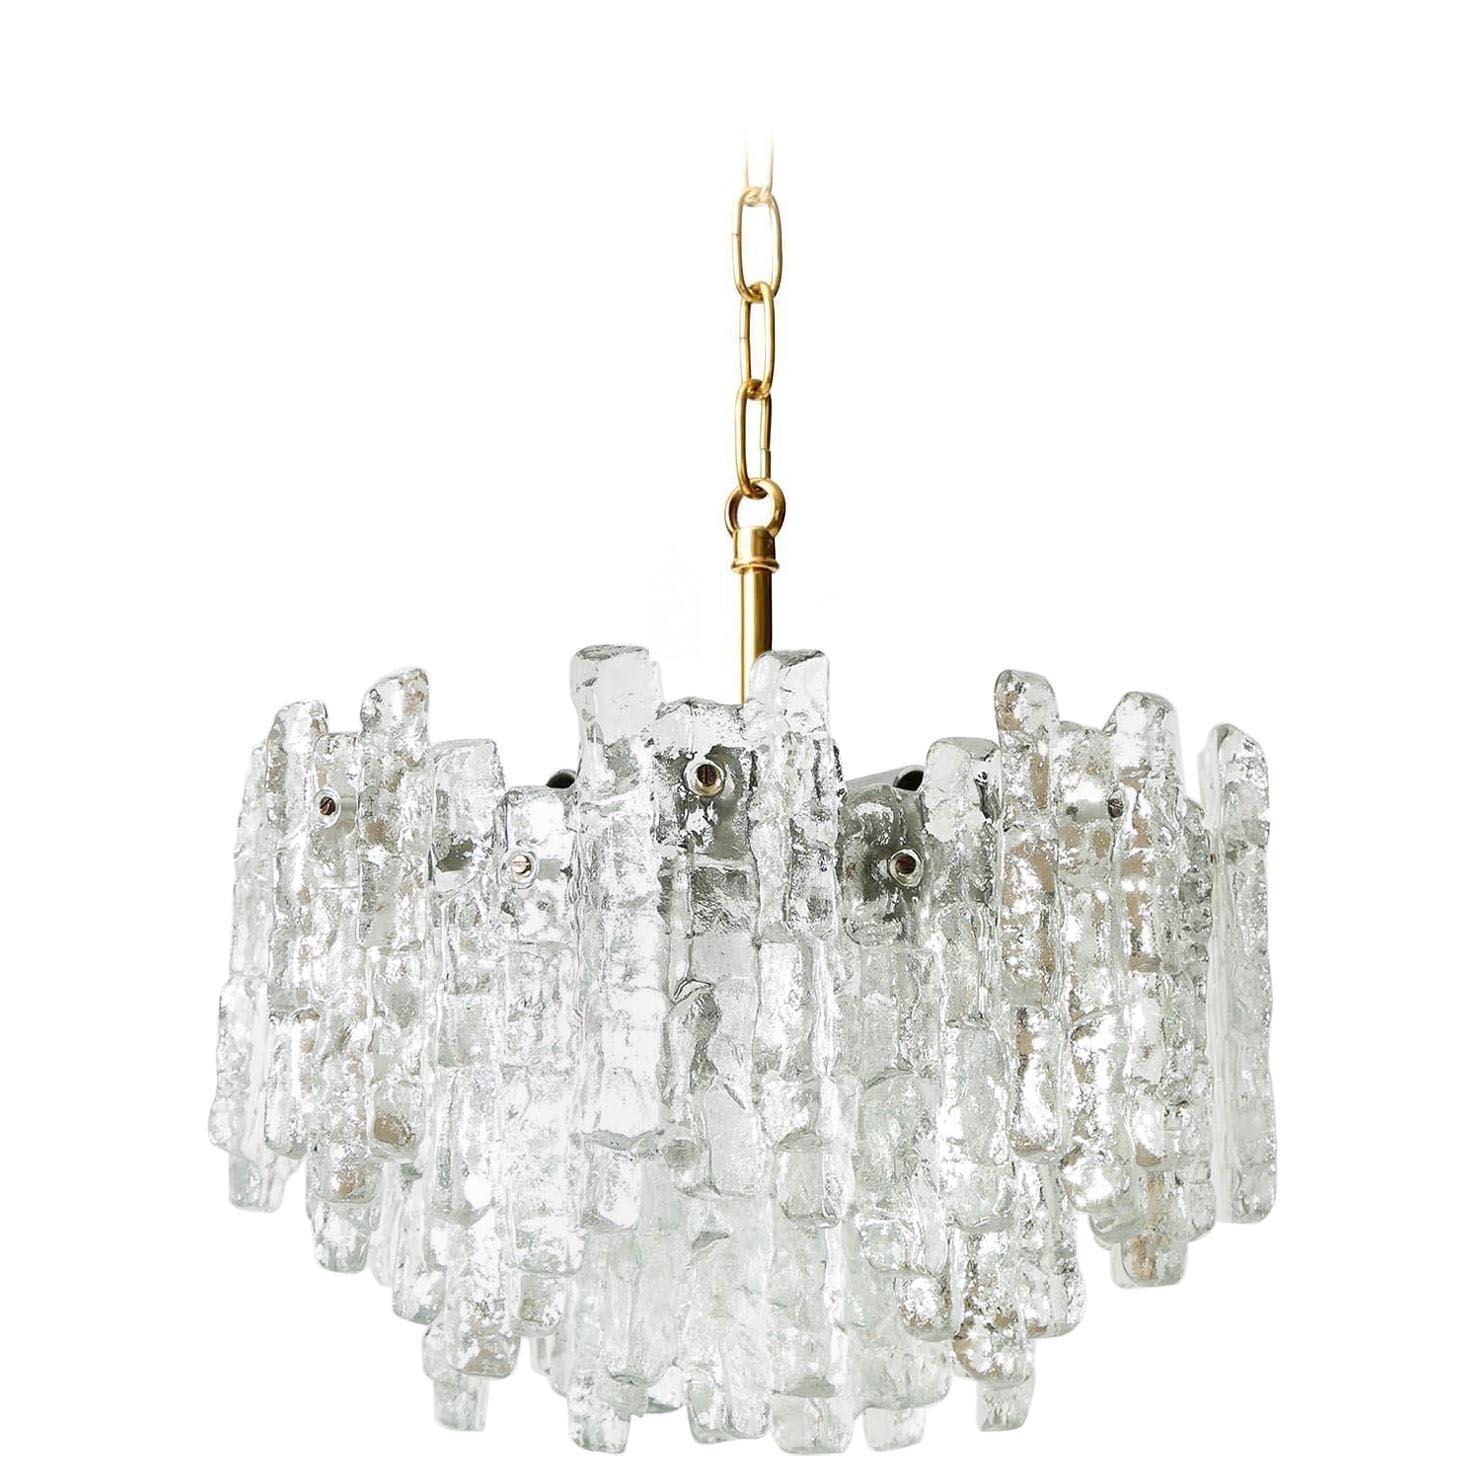 Frosted One of Two Kalmar Ice Glass Chandeliers Light Fixtures, 1960s For Sale